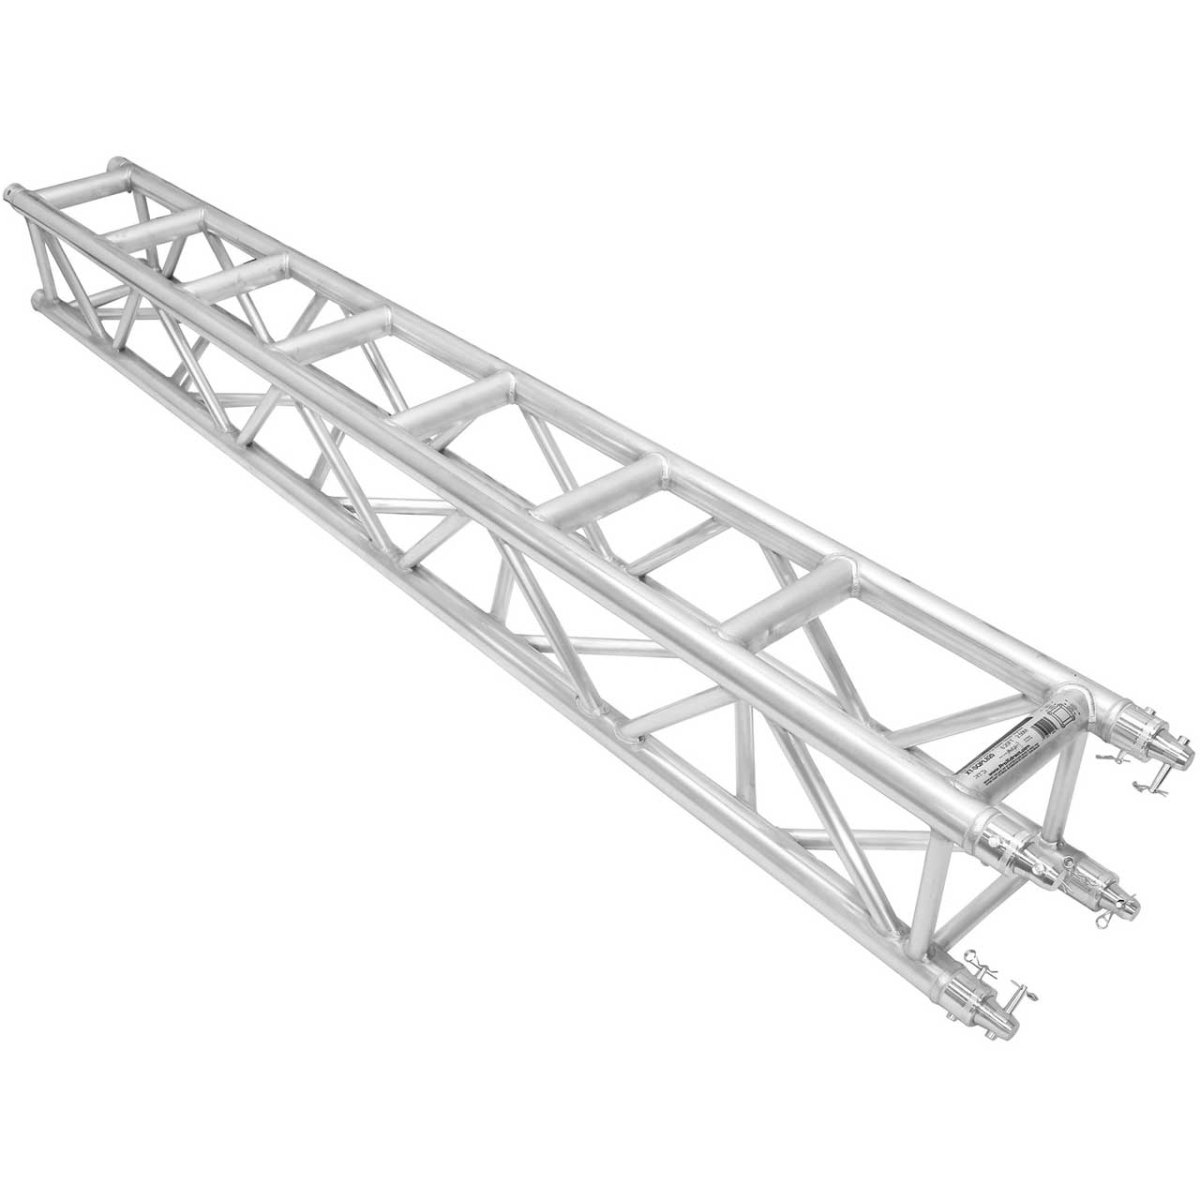 Picture of ProX Live Performance Gear PXG-XT-SQPL820 8.20 ft. F34 2.5M Professional Ladder Truss Segment with 3 mm Tubing